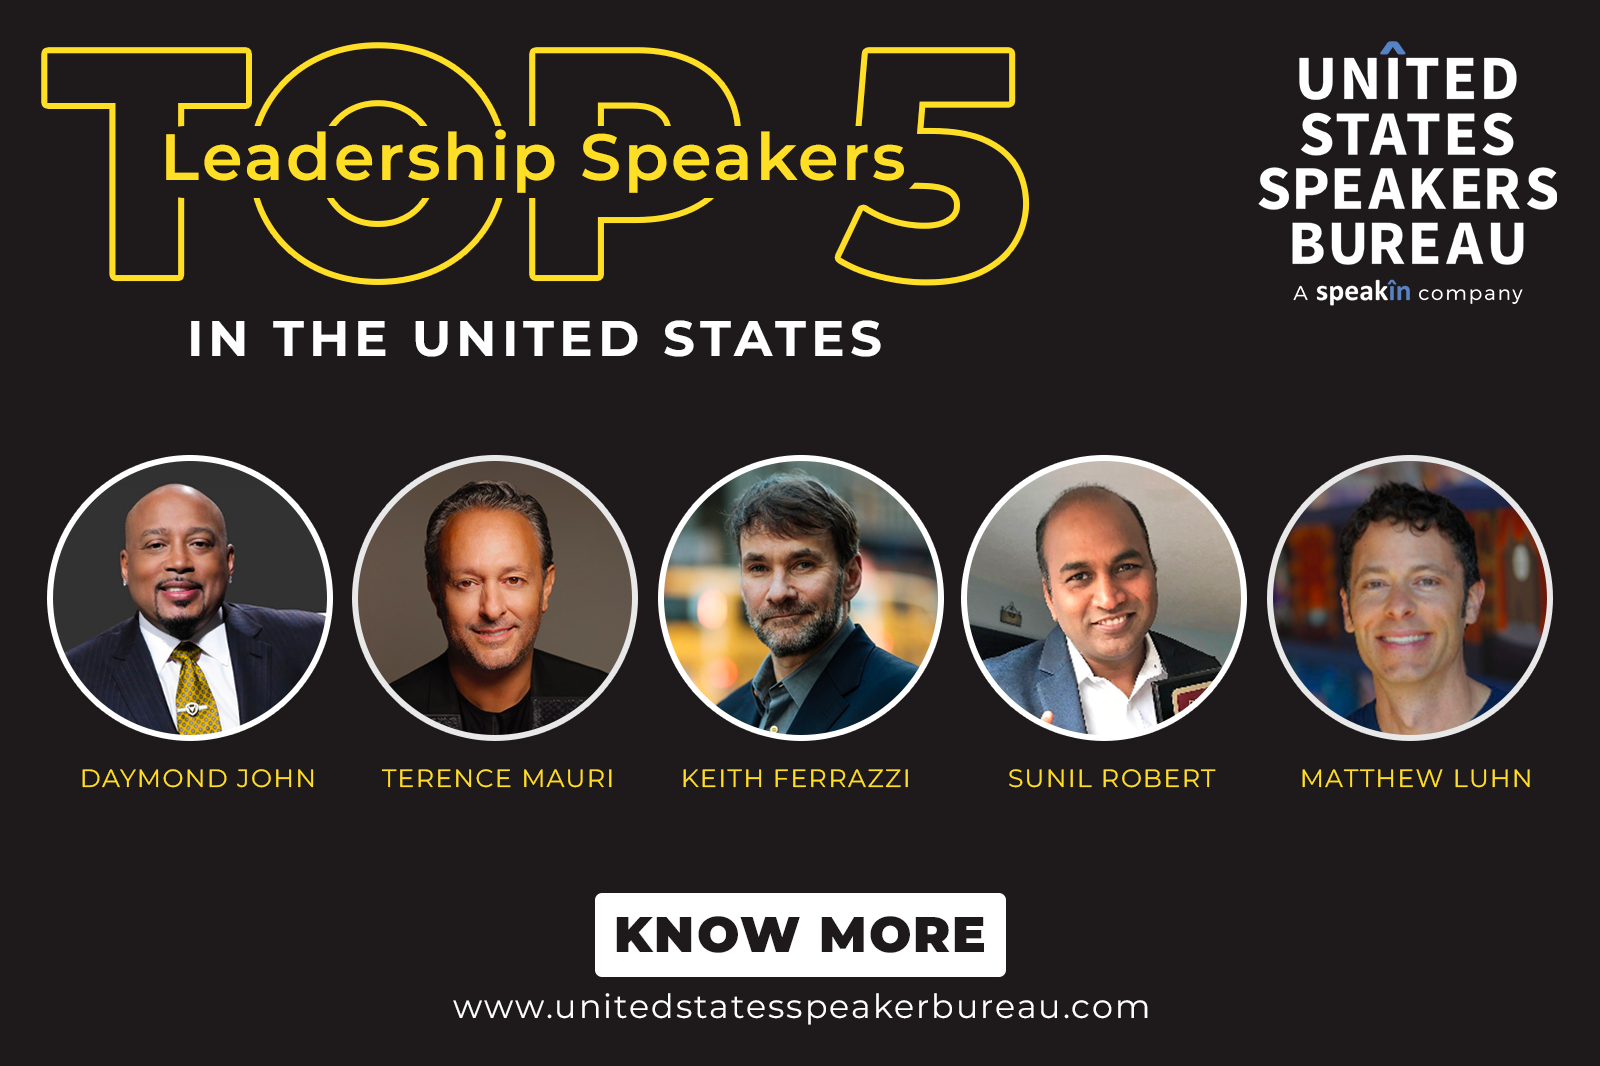 Top 5 Leadership Speakers in the United States